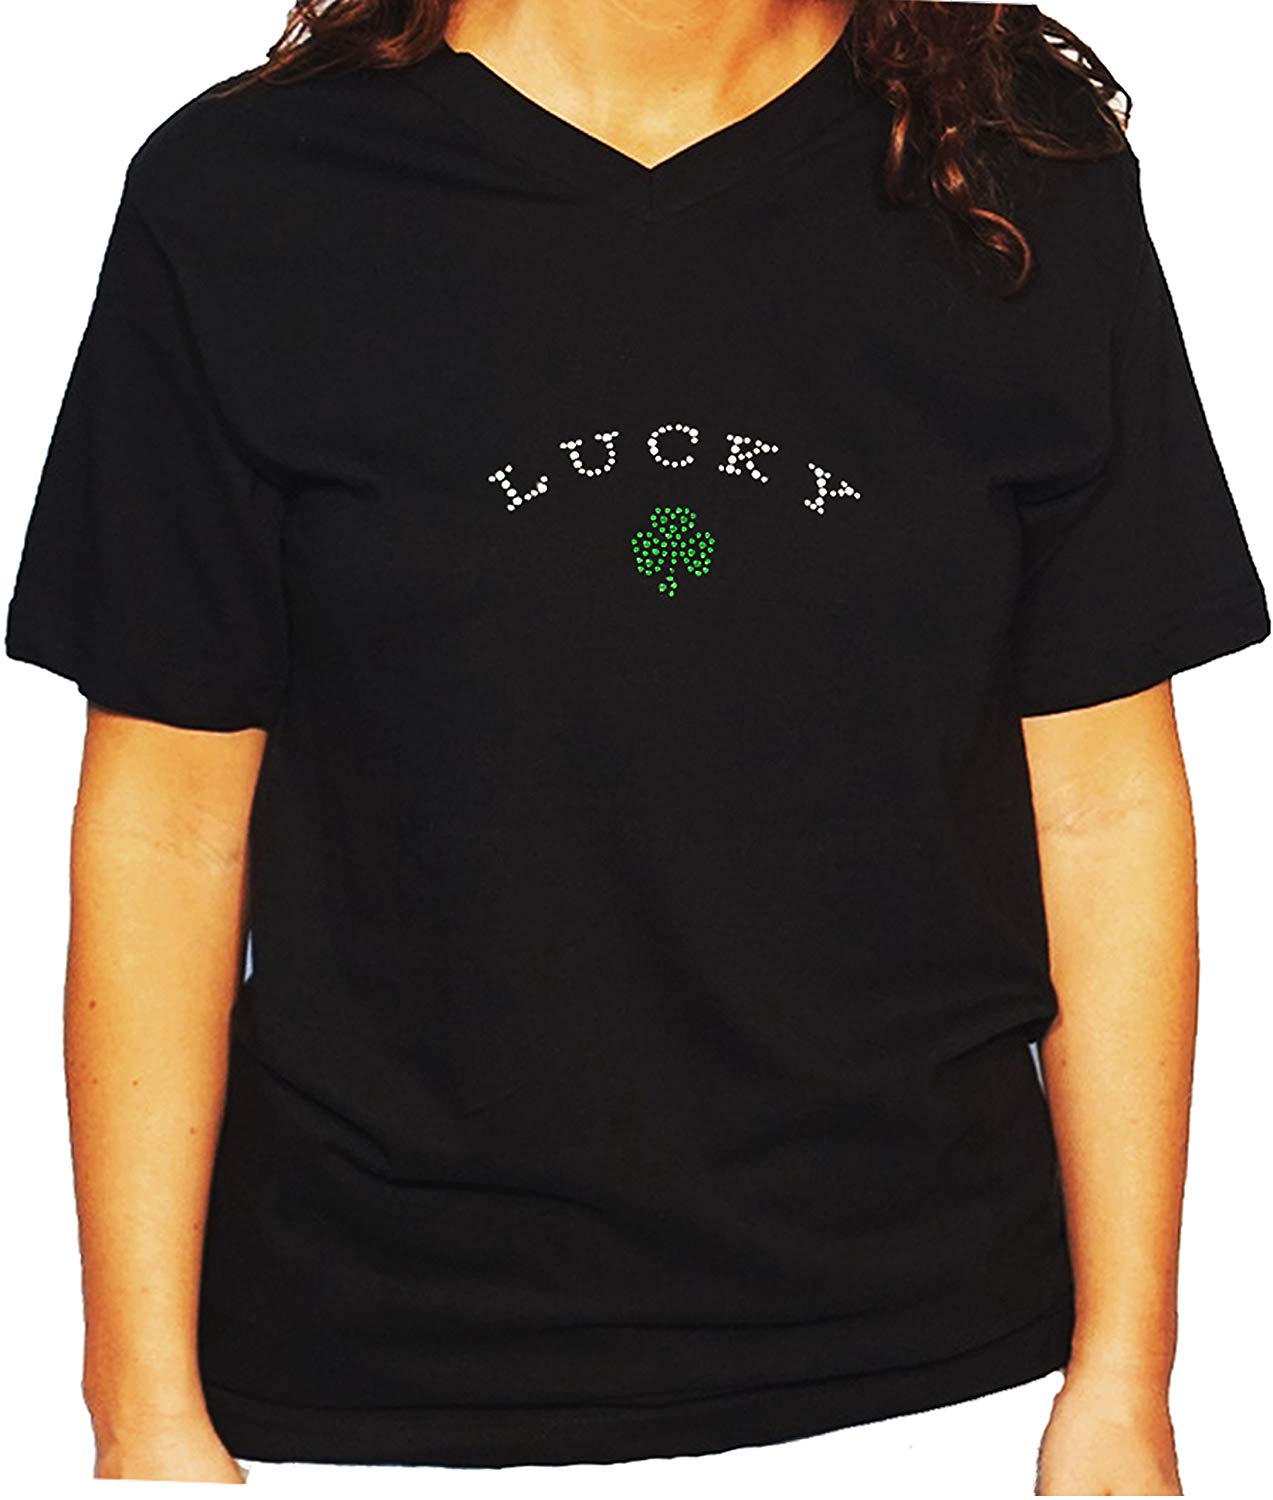 Women's / Unisex T-Shirt with Lucky 3 Leaf Clover In Rhinestones